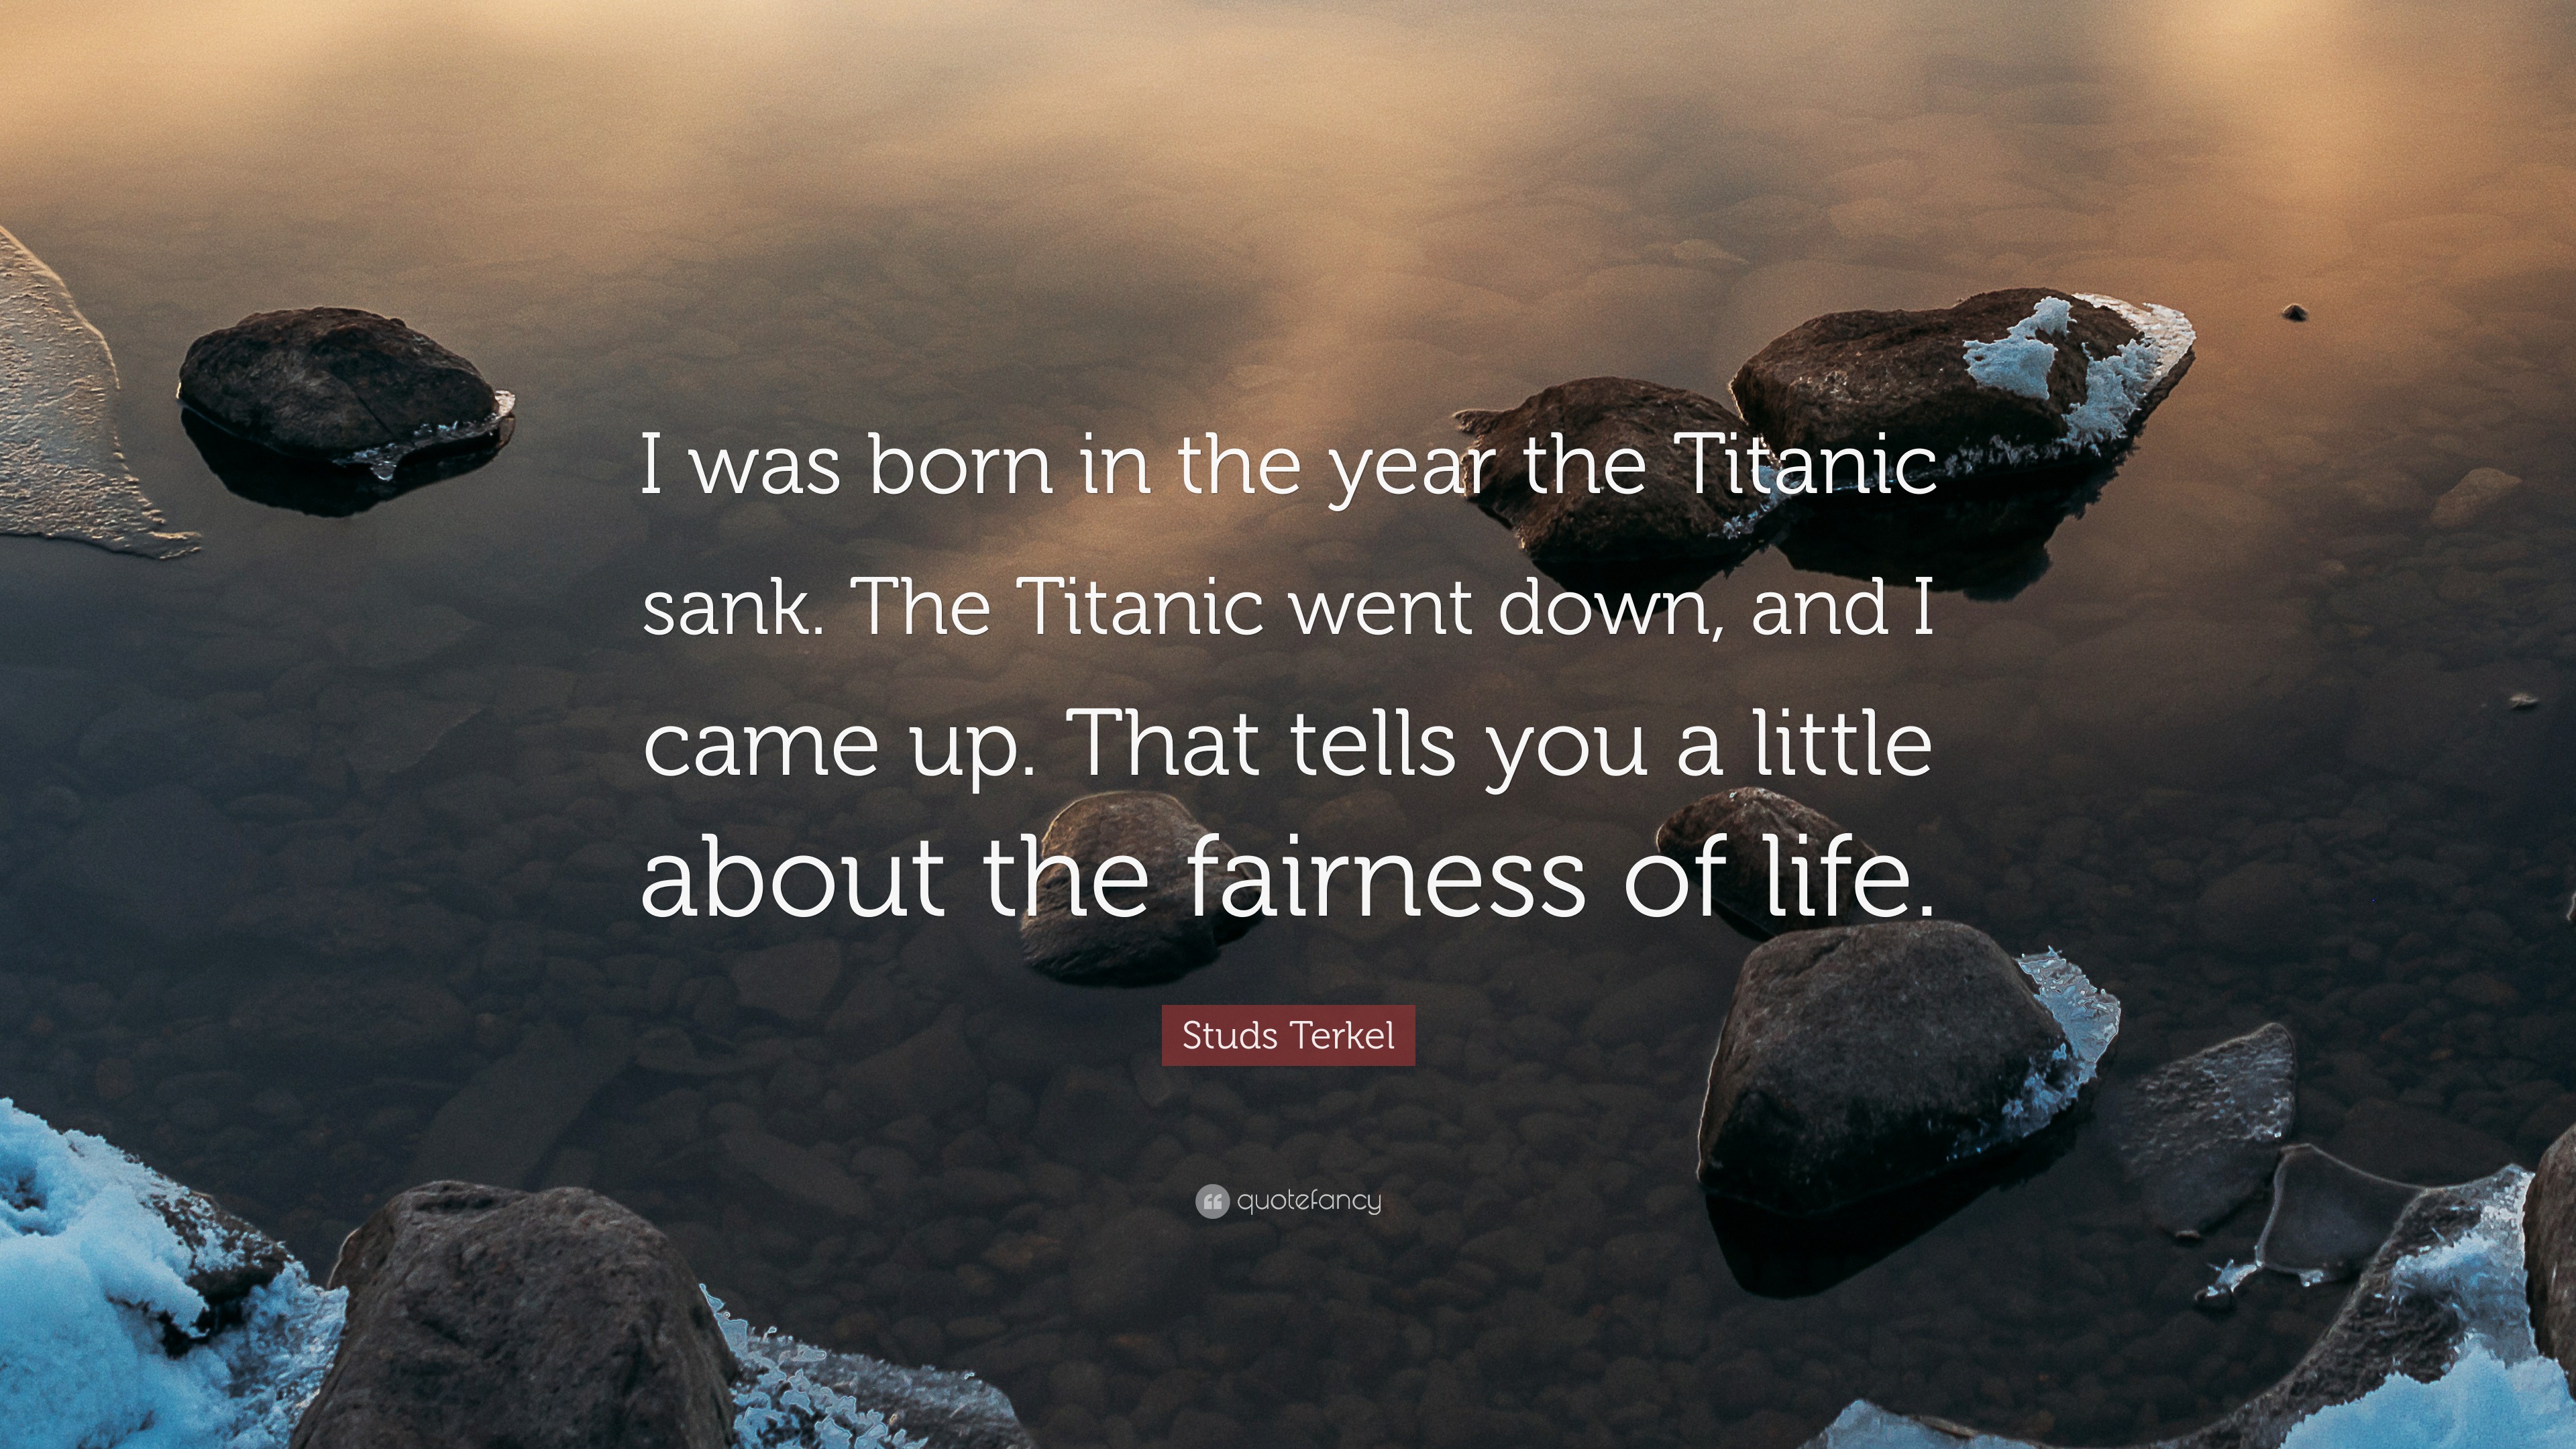 3316590 Studs Terkel Quote I was born in the year the Titanic sank The